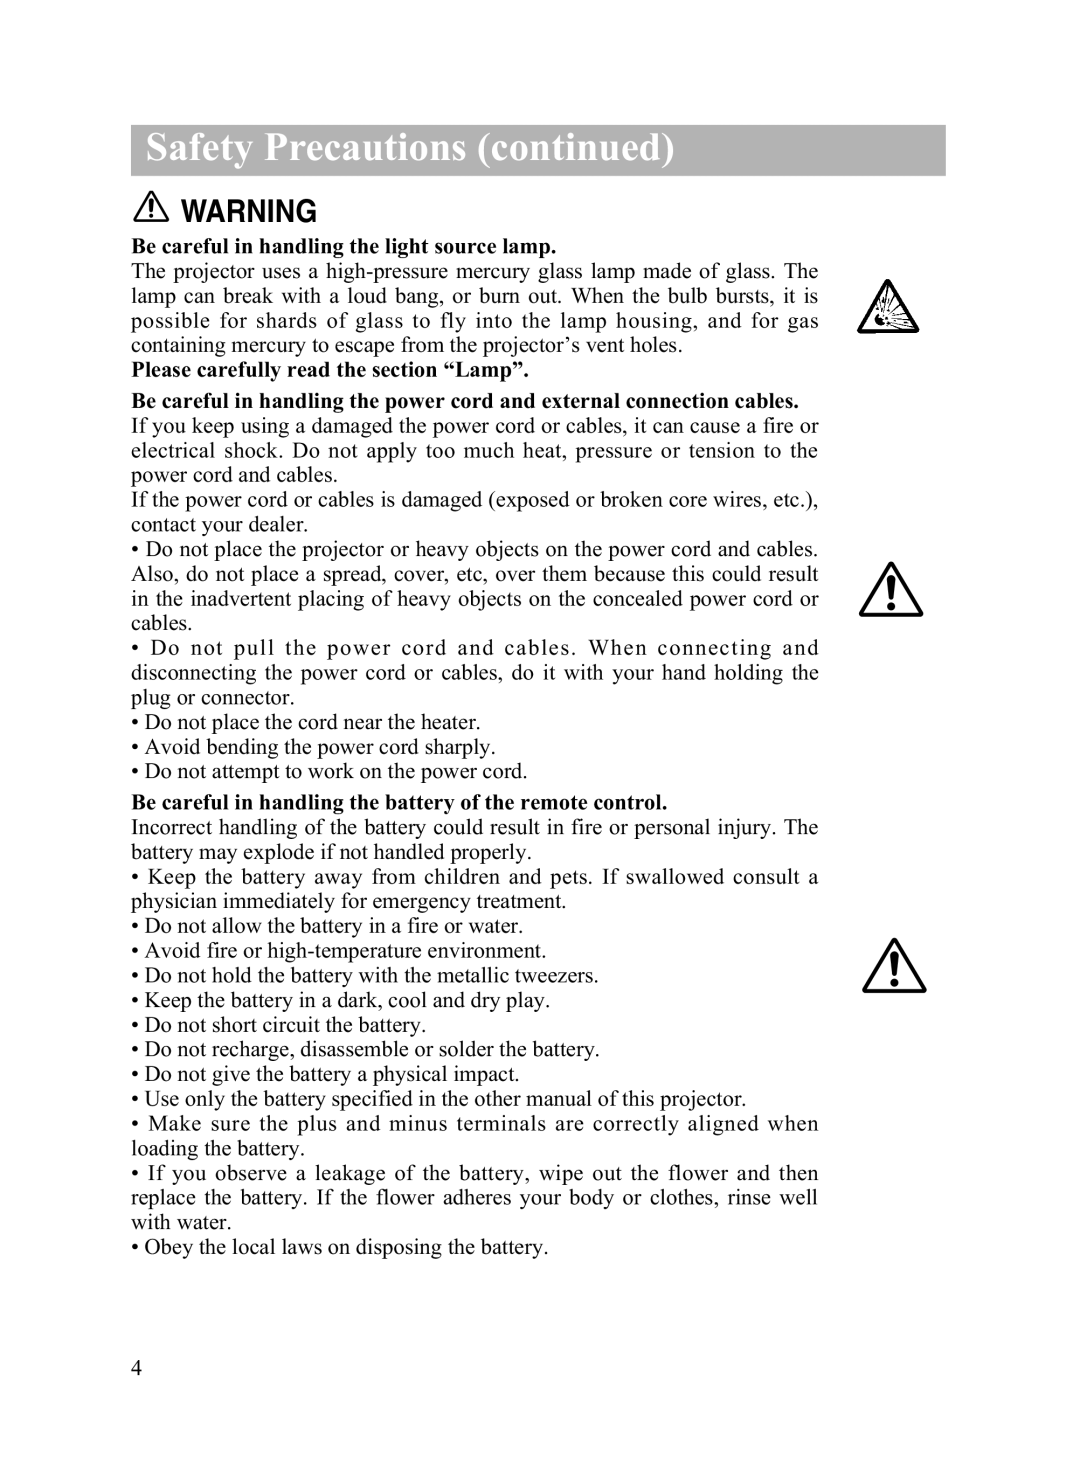 Dukane 8055 user manual Safety Precautions continued, Be careful in handling the light source lamp 